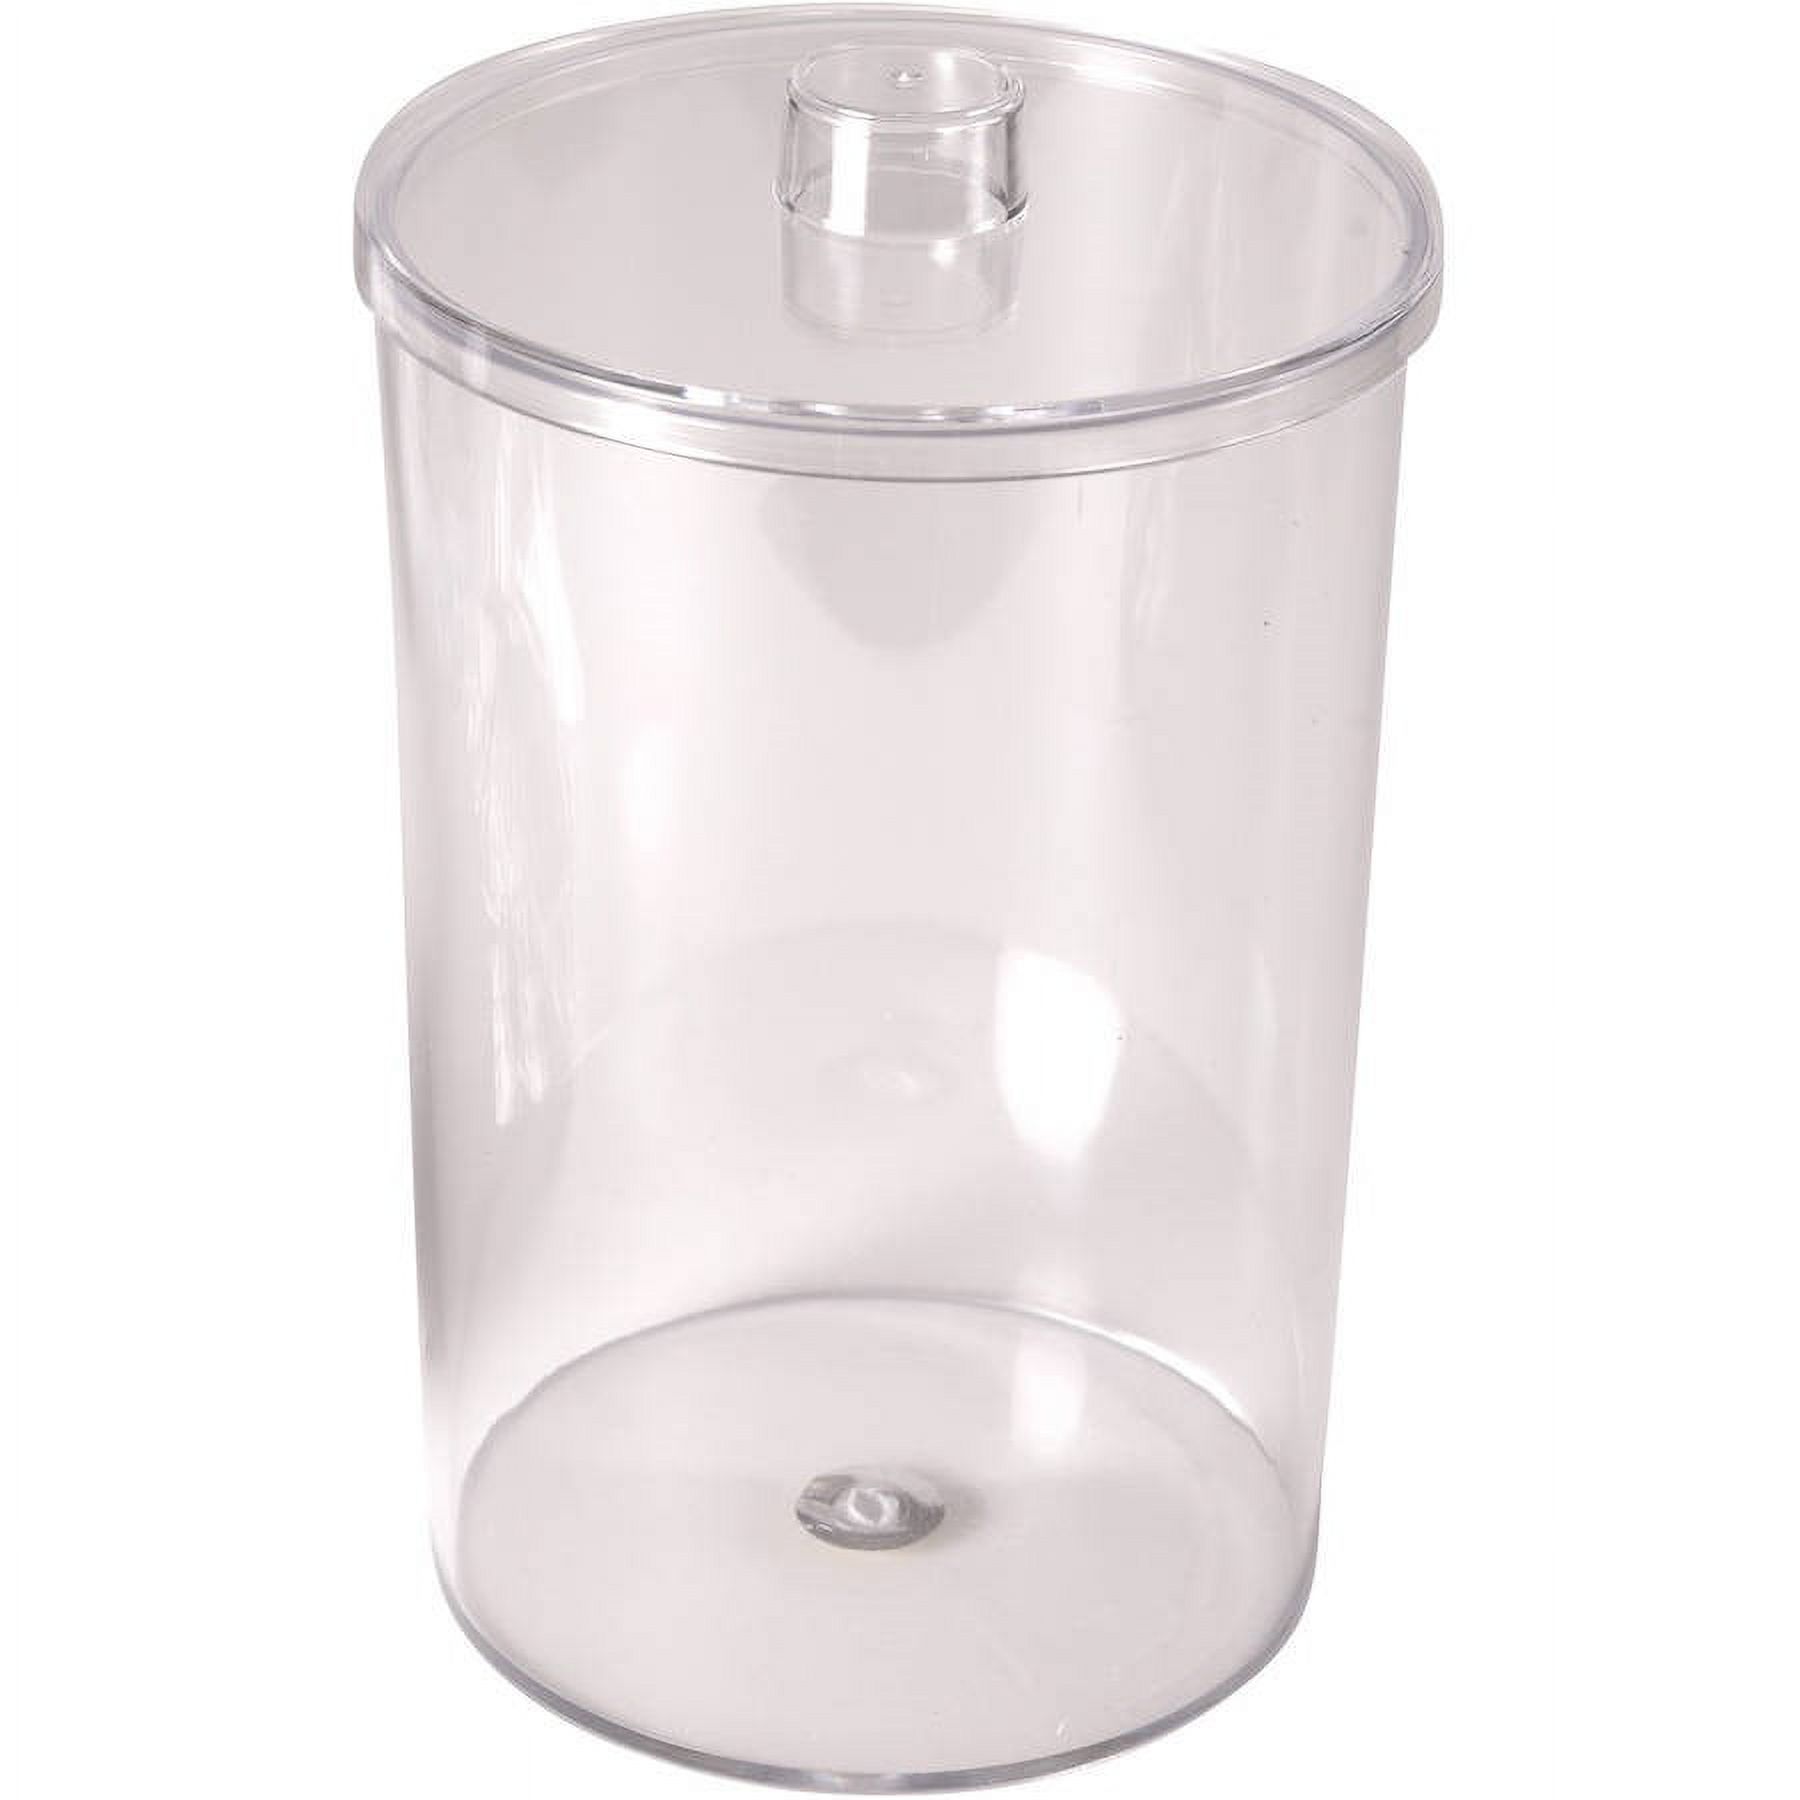 MABIS Apothecary Jar, Medical Container Sundry Jar with Lid for Home or Medical Doctor's Office, Clear - image 1 of 3